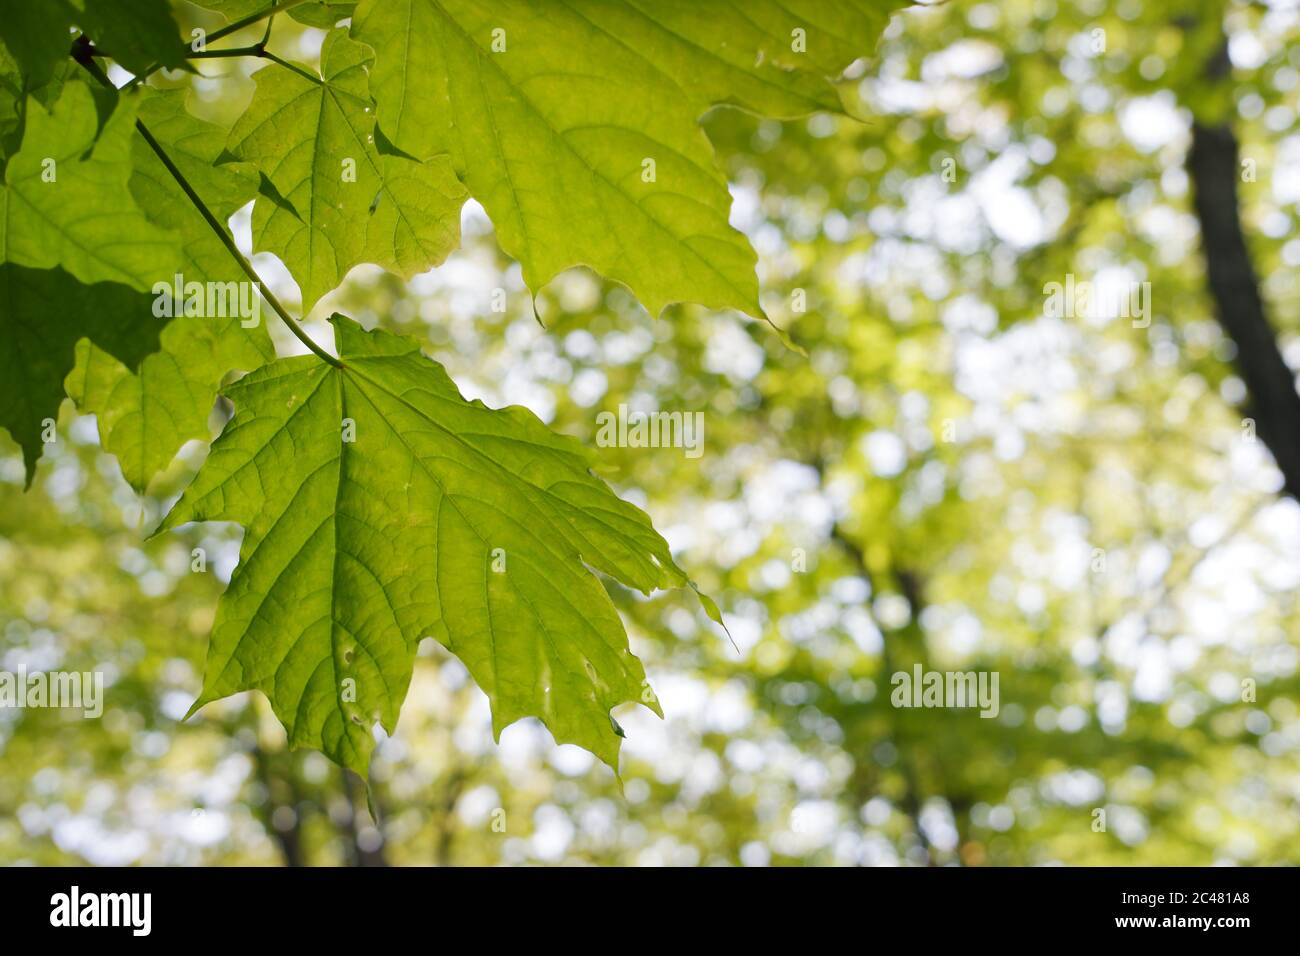 Green maple leaves seen at park Stock Photo